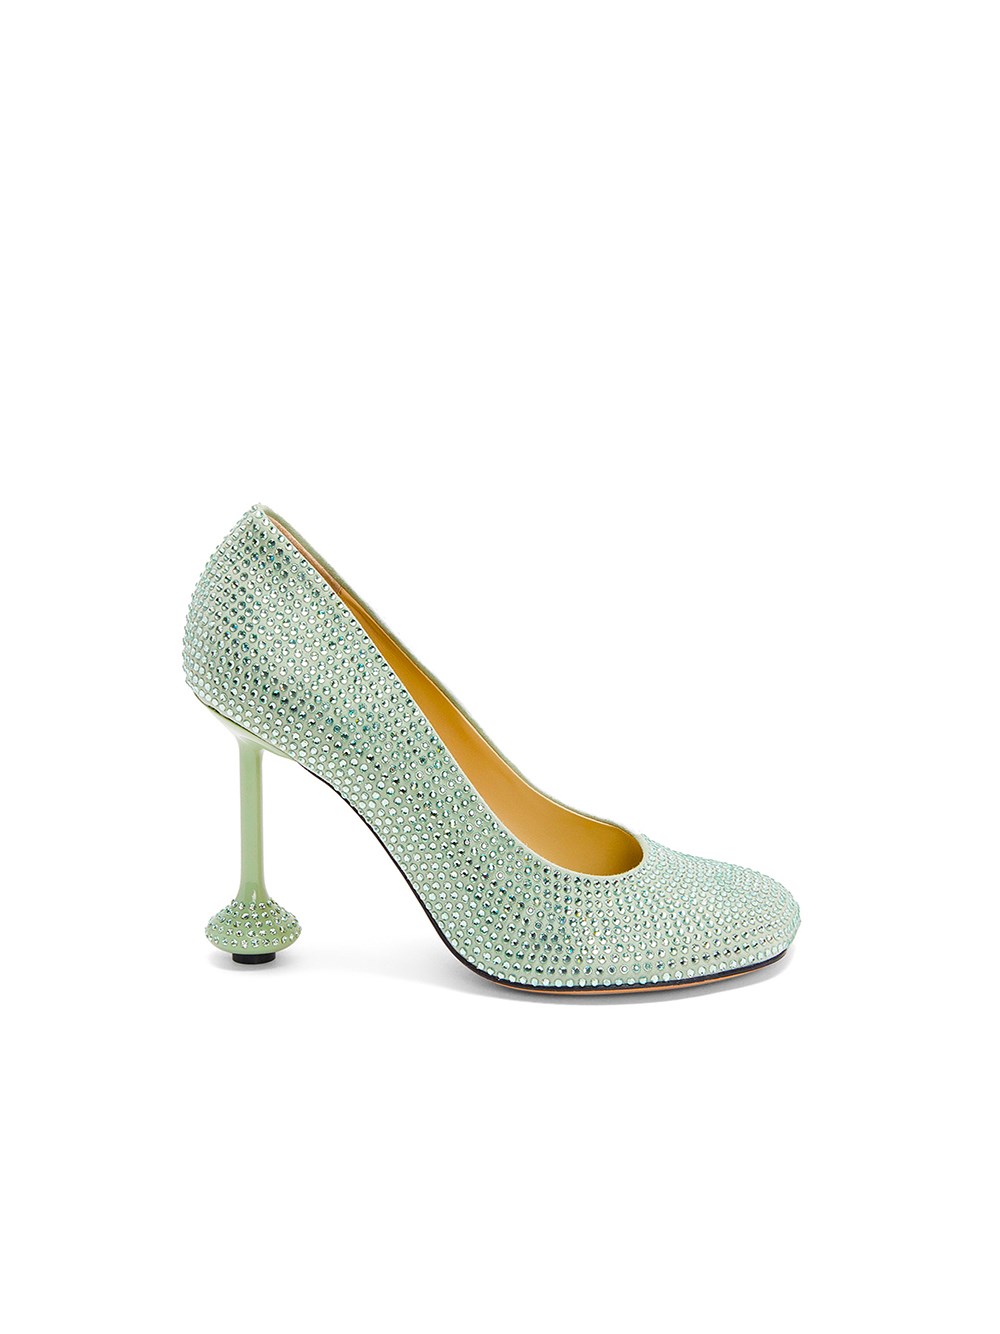 Loewe Toy Pumps In Suede And Allover Rhinestones In Green